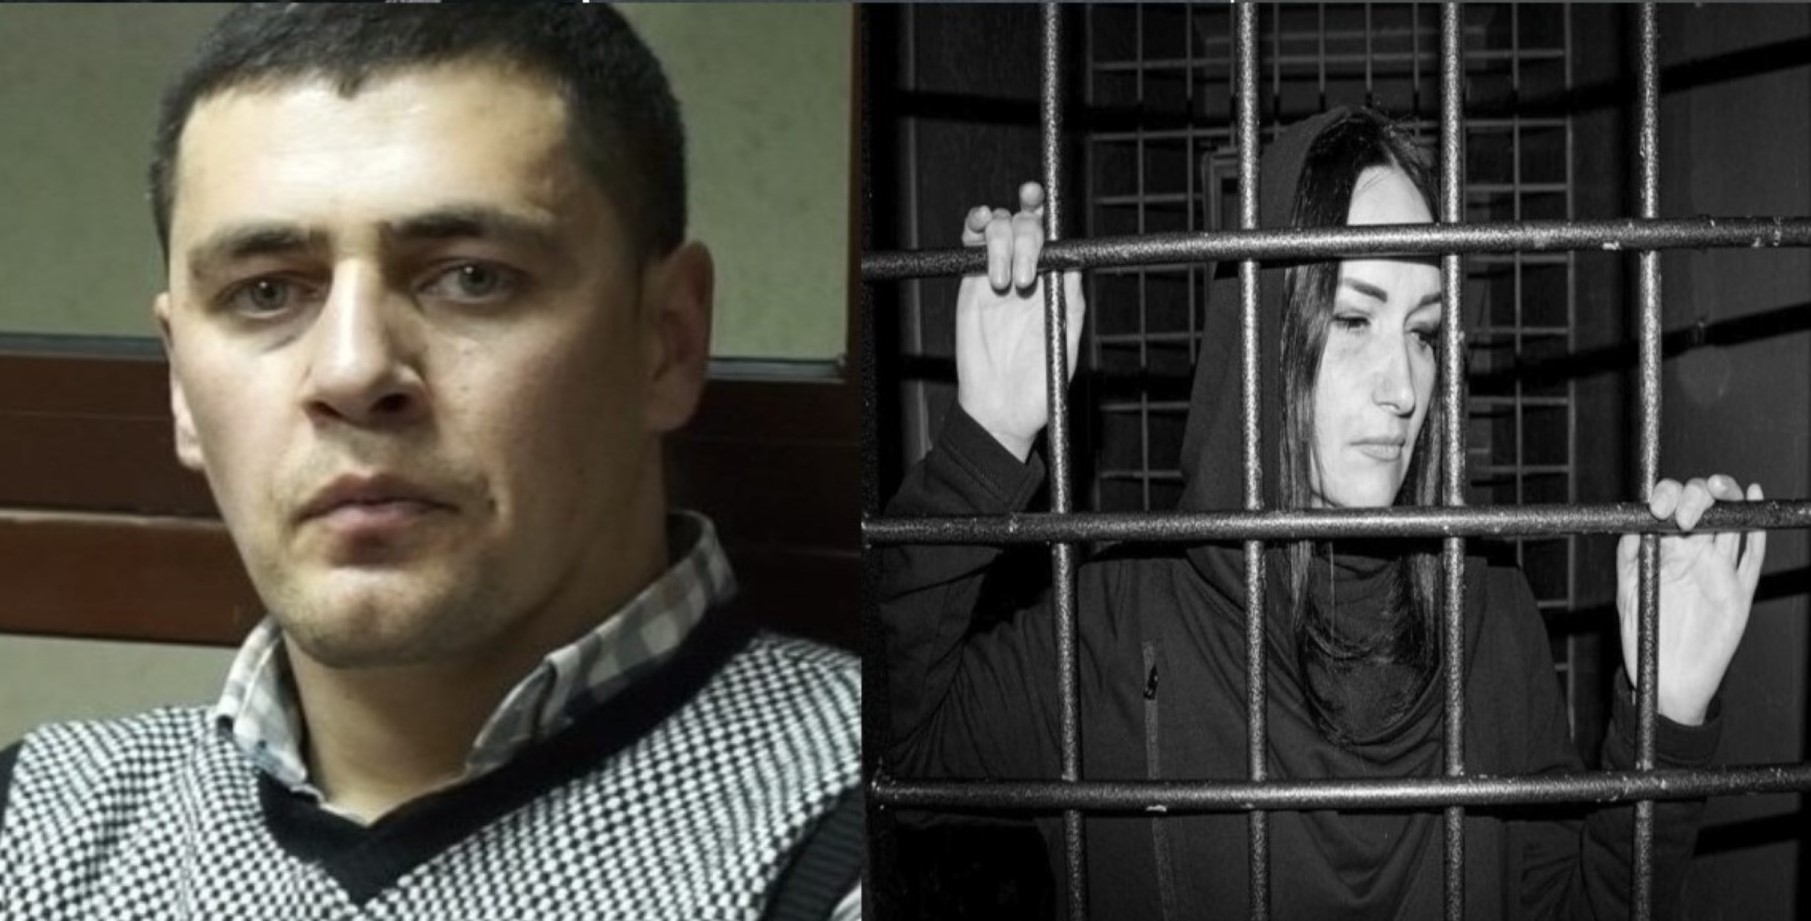 Amet Suleimanov, Iryna Danilovych, just two of Russia’s huge number of Crimean Tatar and other Ukrainian political prisoners